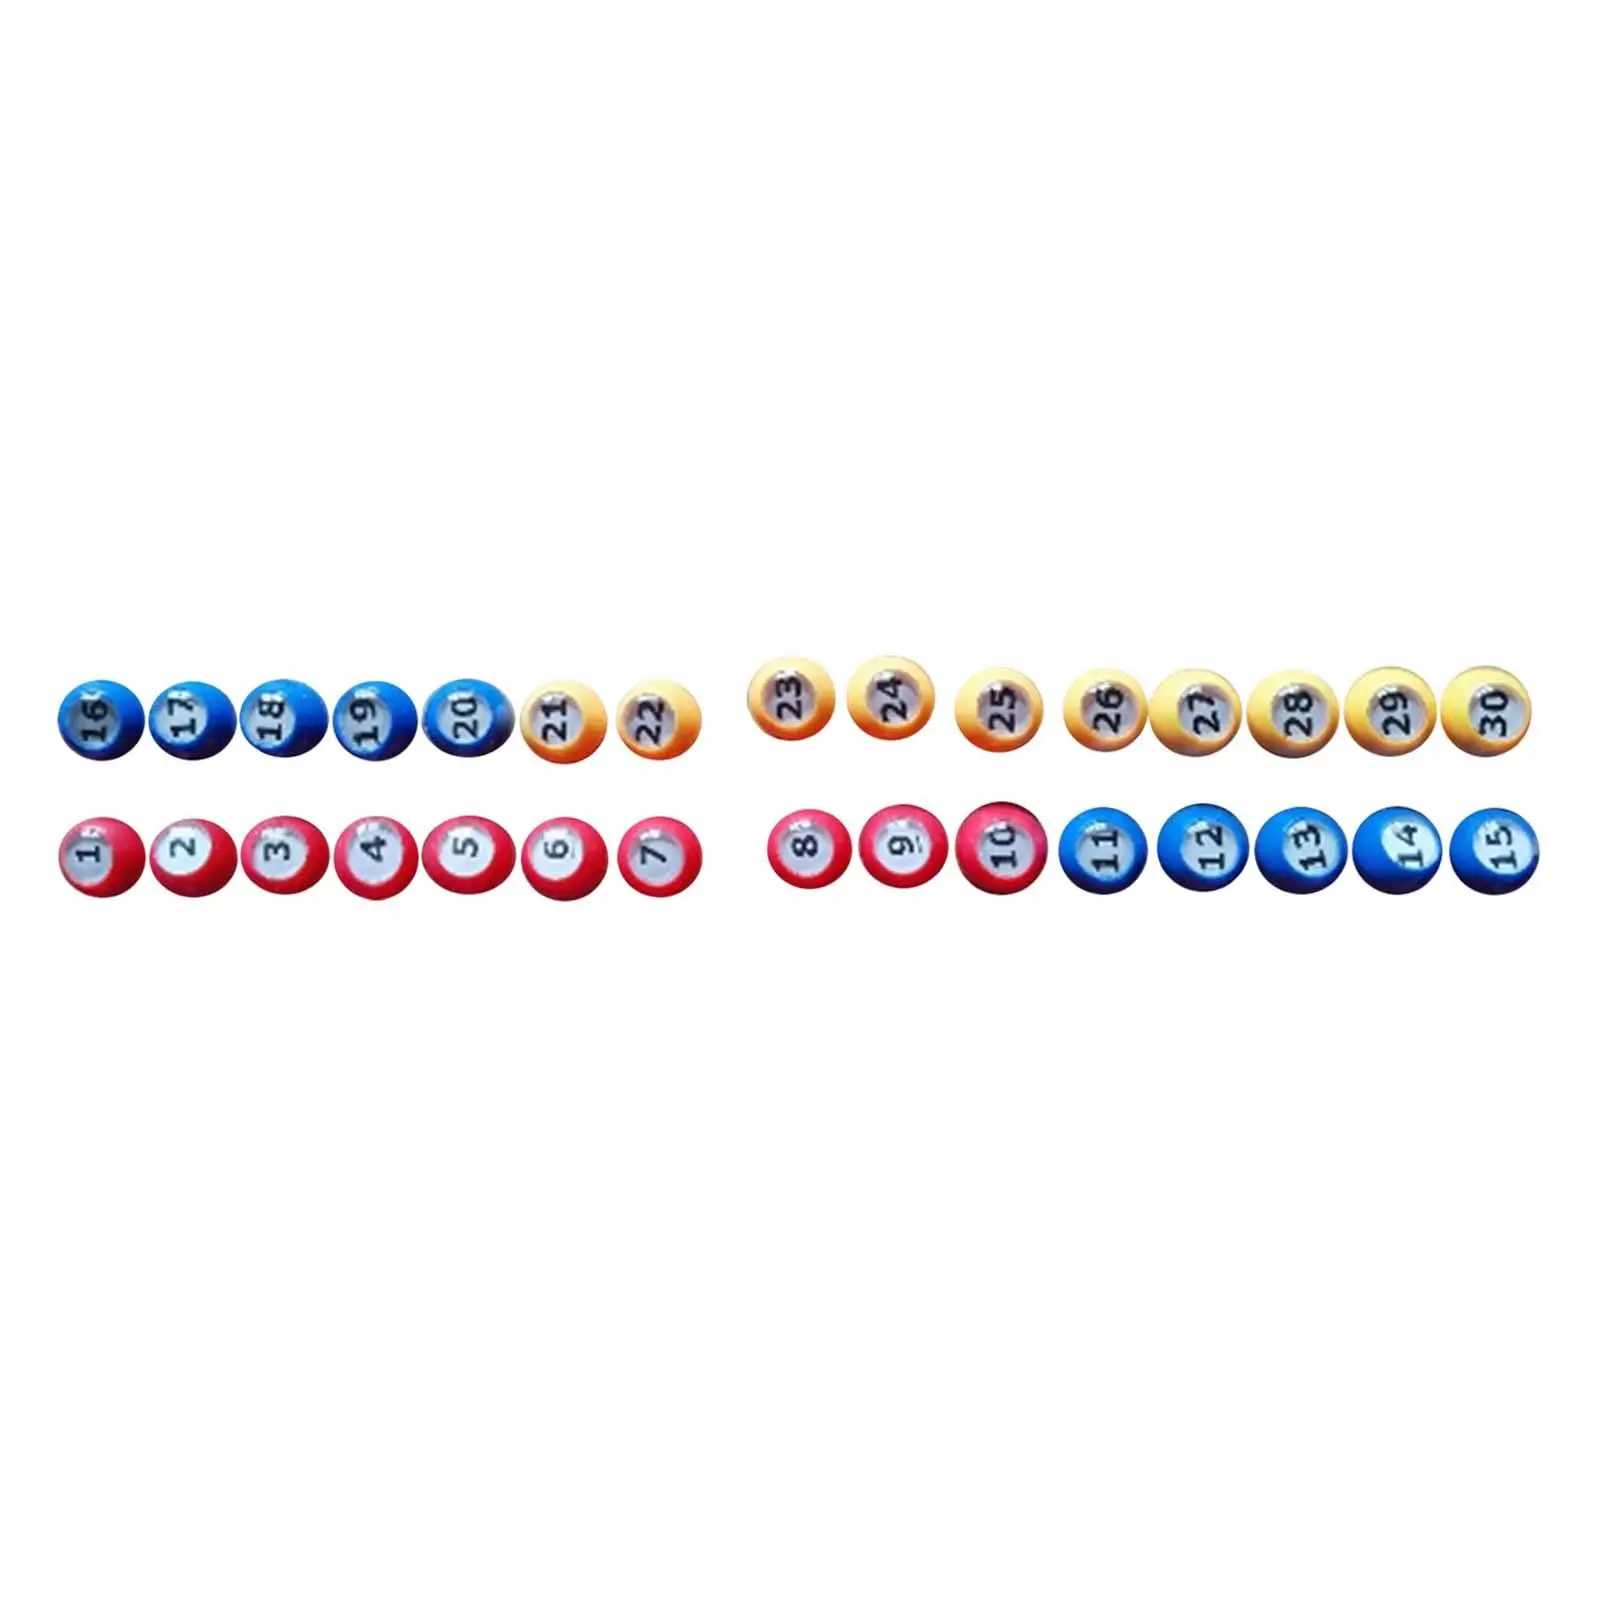 30 Pieces Bingo Ball Universal Equipment Portable Direct Replaces Durable Tally